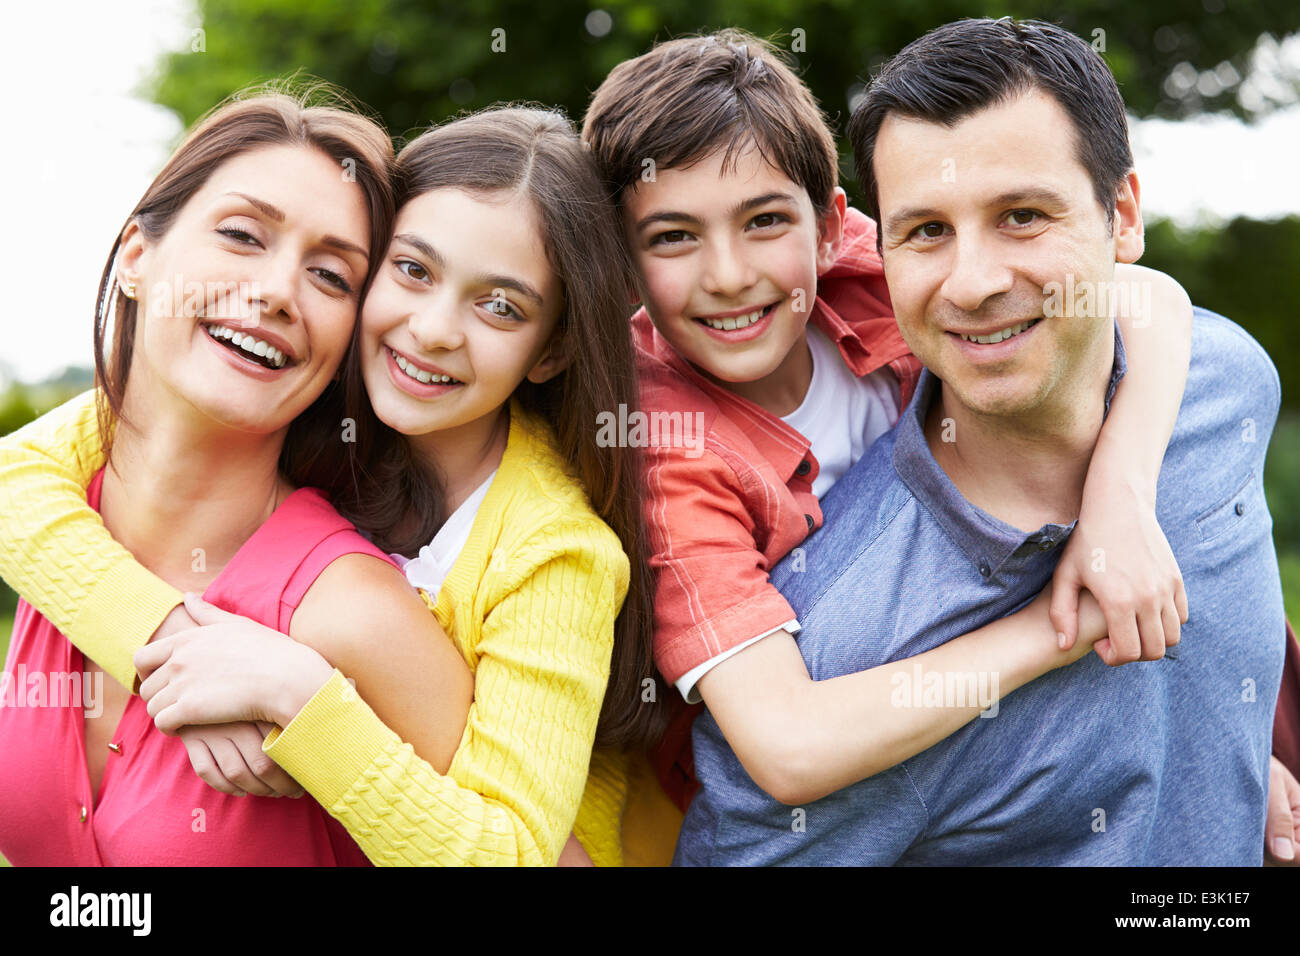 Portrait of Hispanic Family in Countryside Banque D'Images